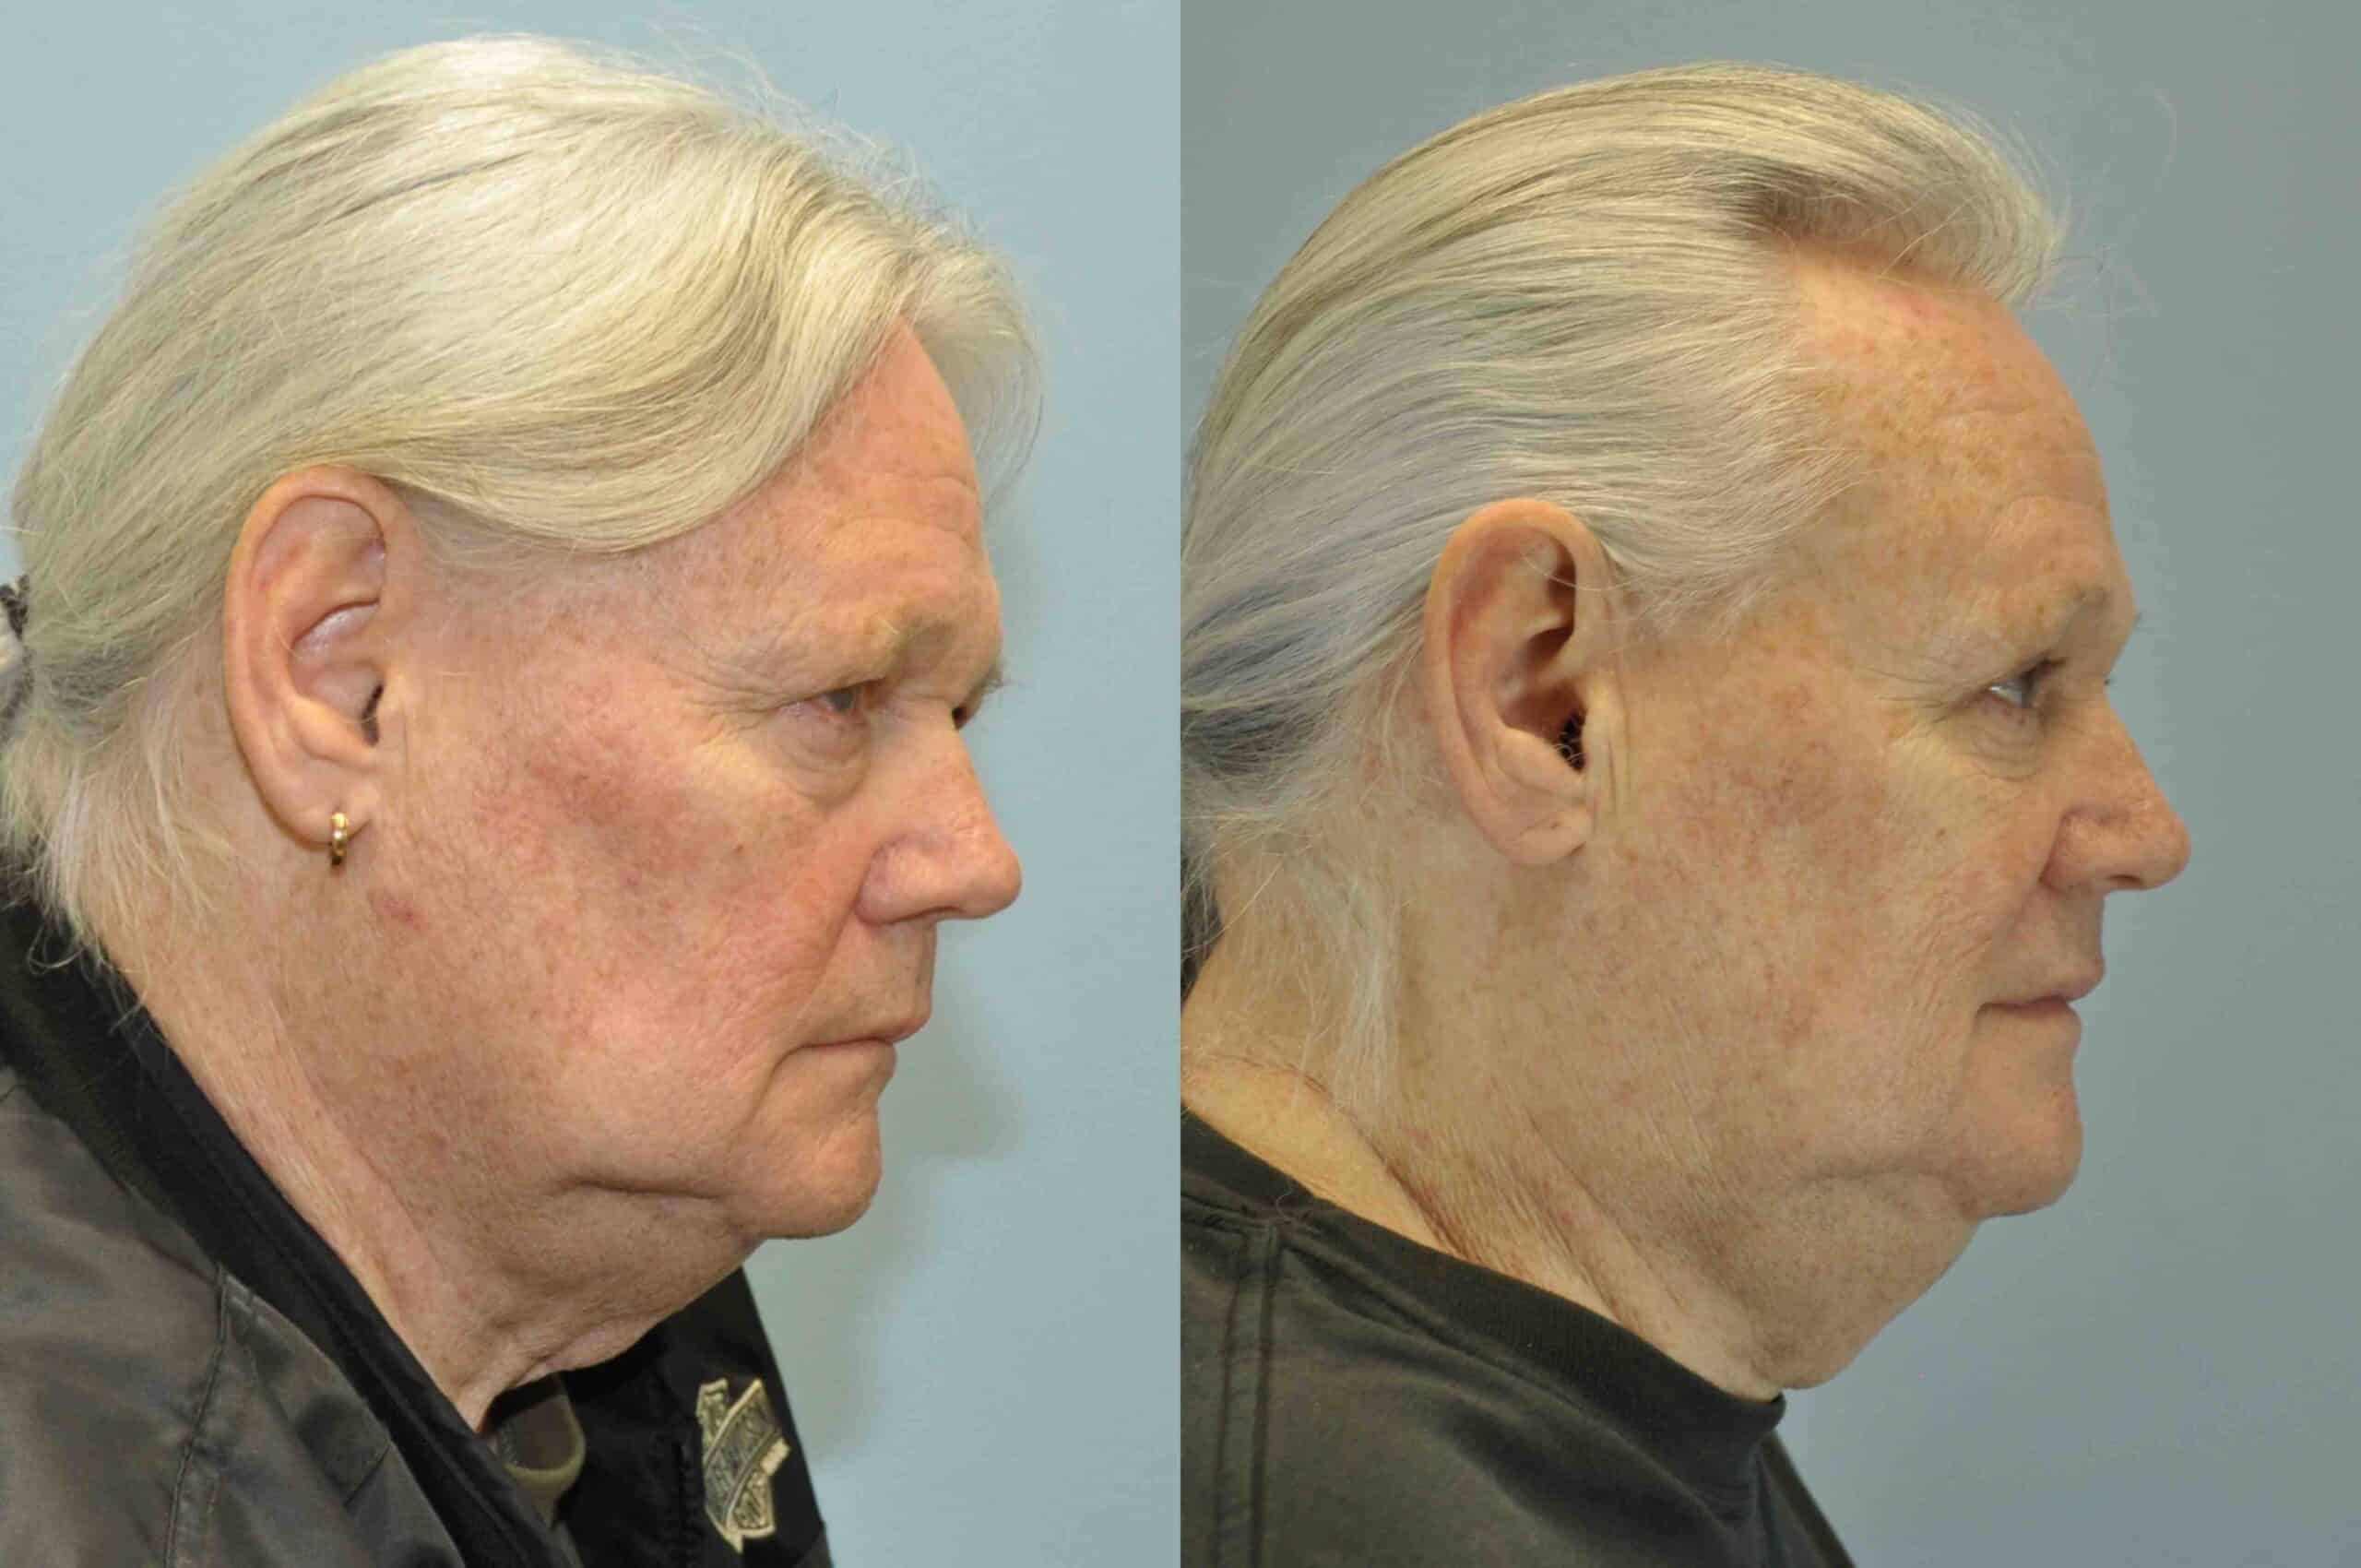 Before and after, 5 mo post op from upper blepharoplasty performed by Dr. Paul Vanek (side view)